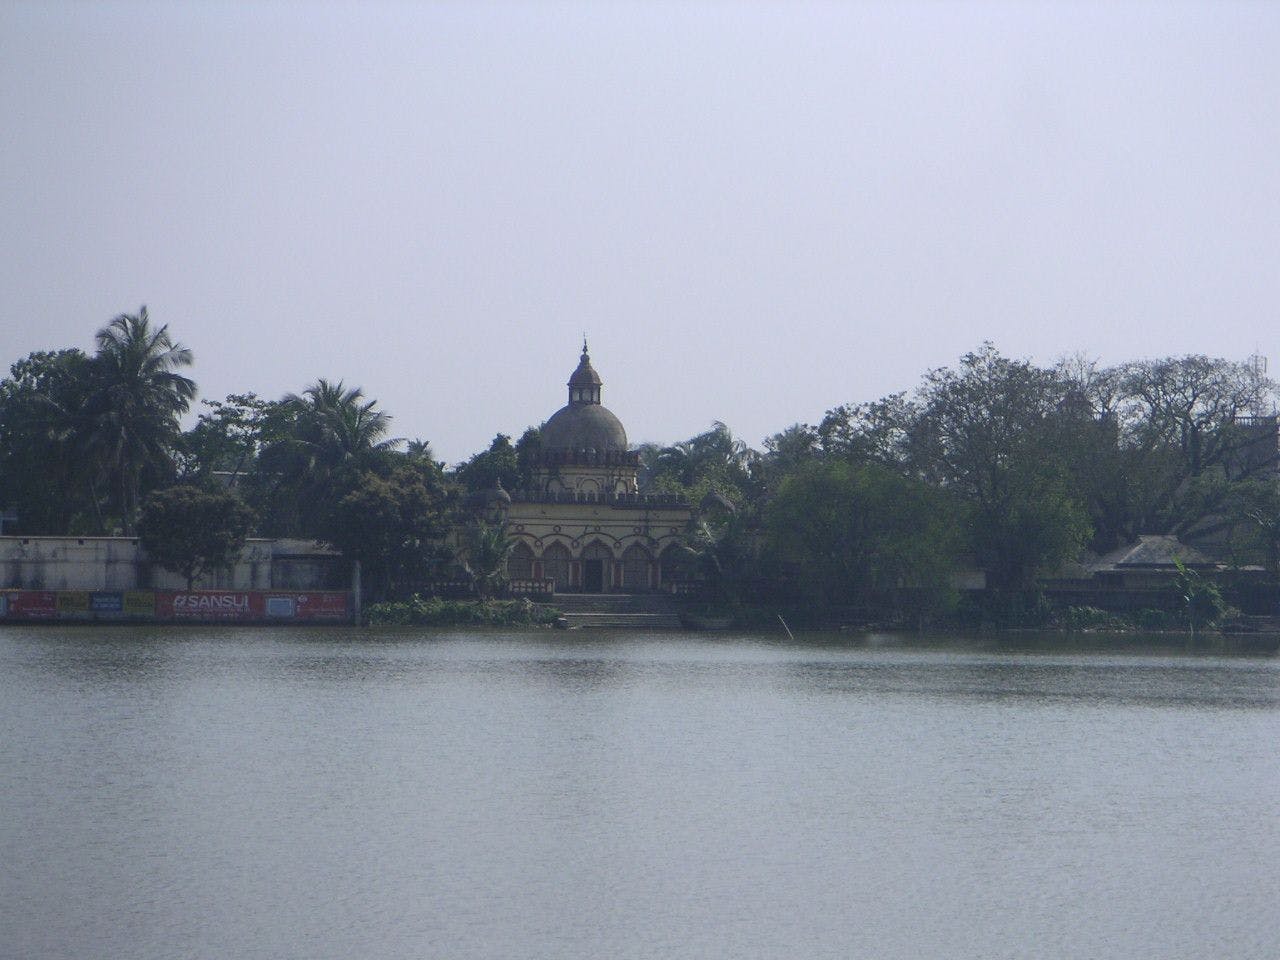 The Temples in the Palace Compound